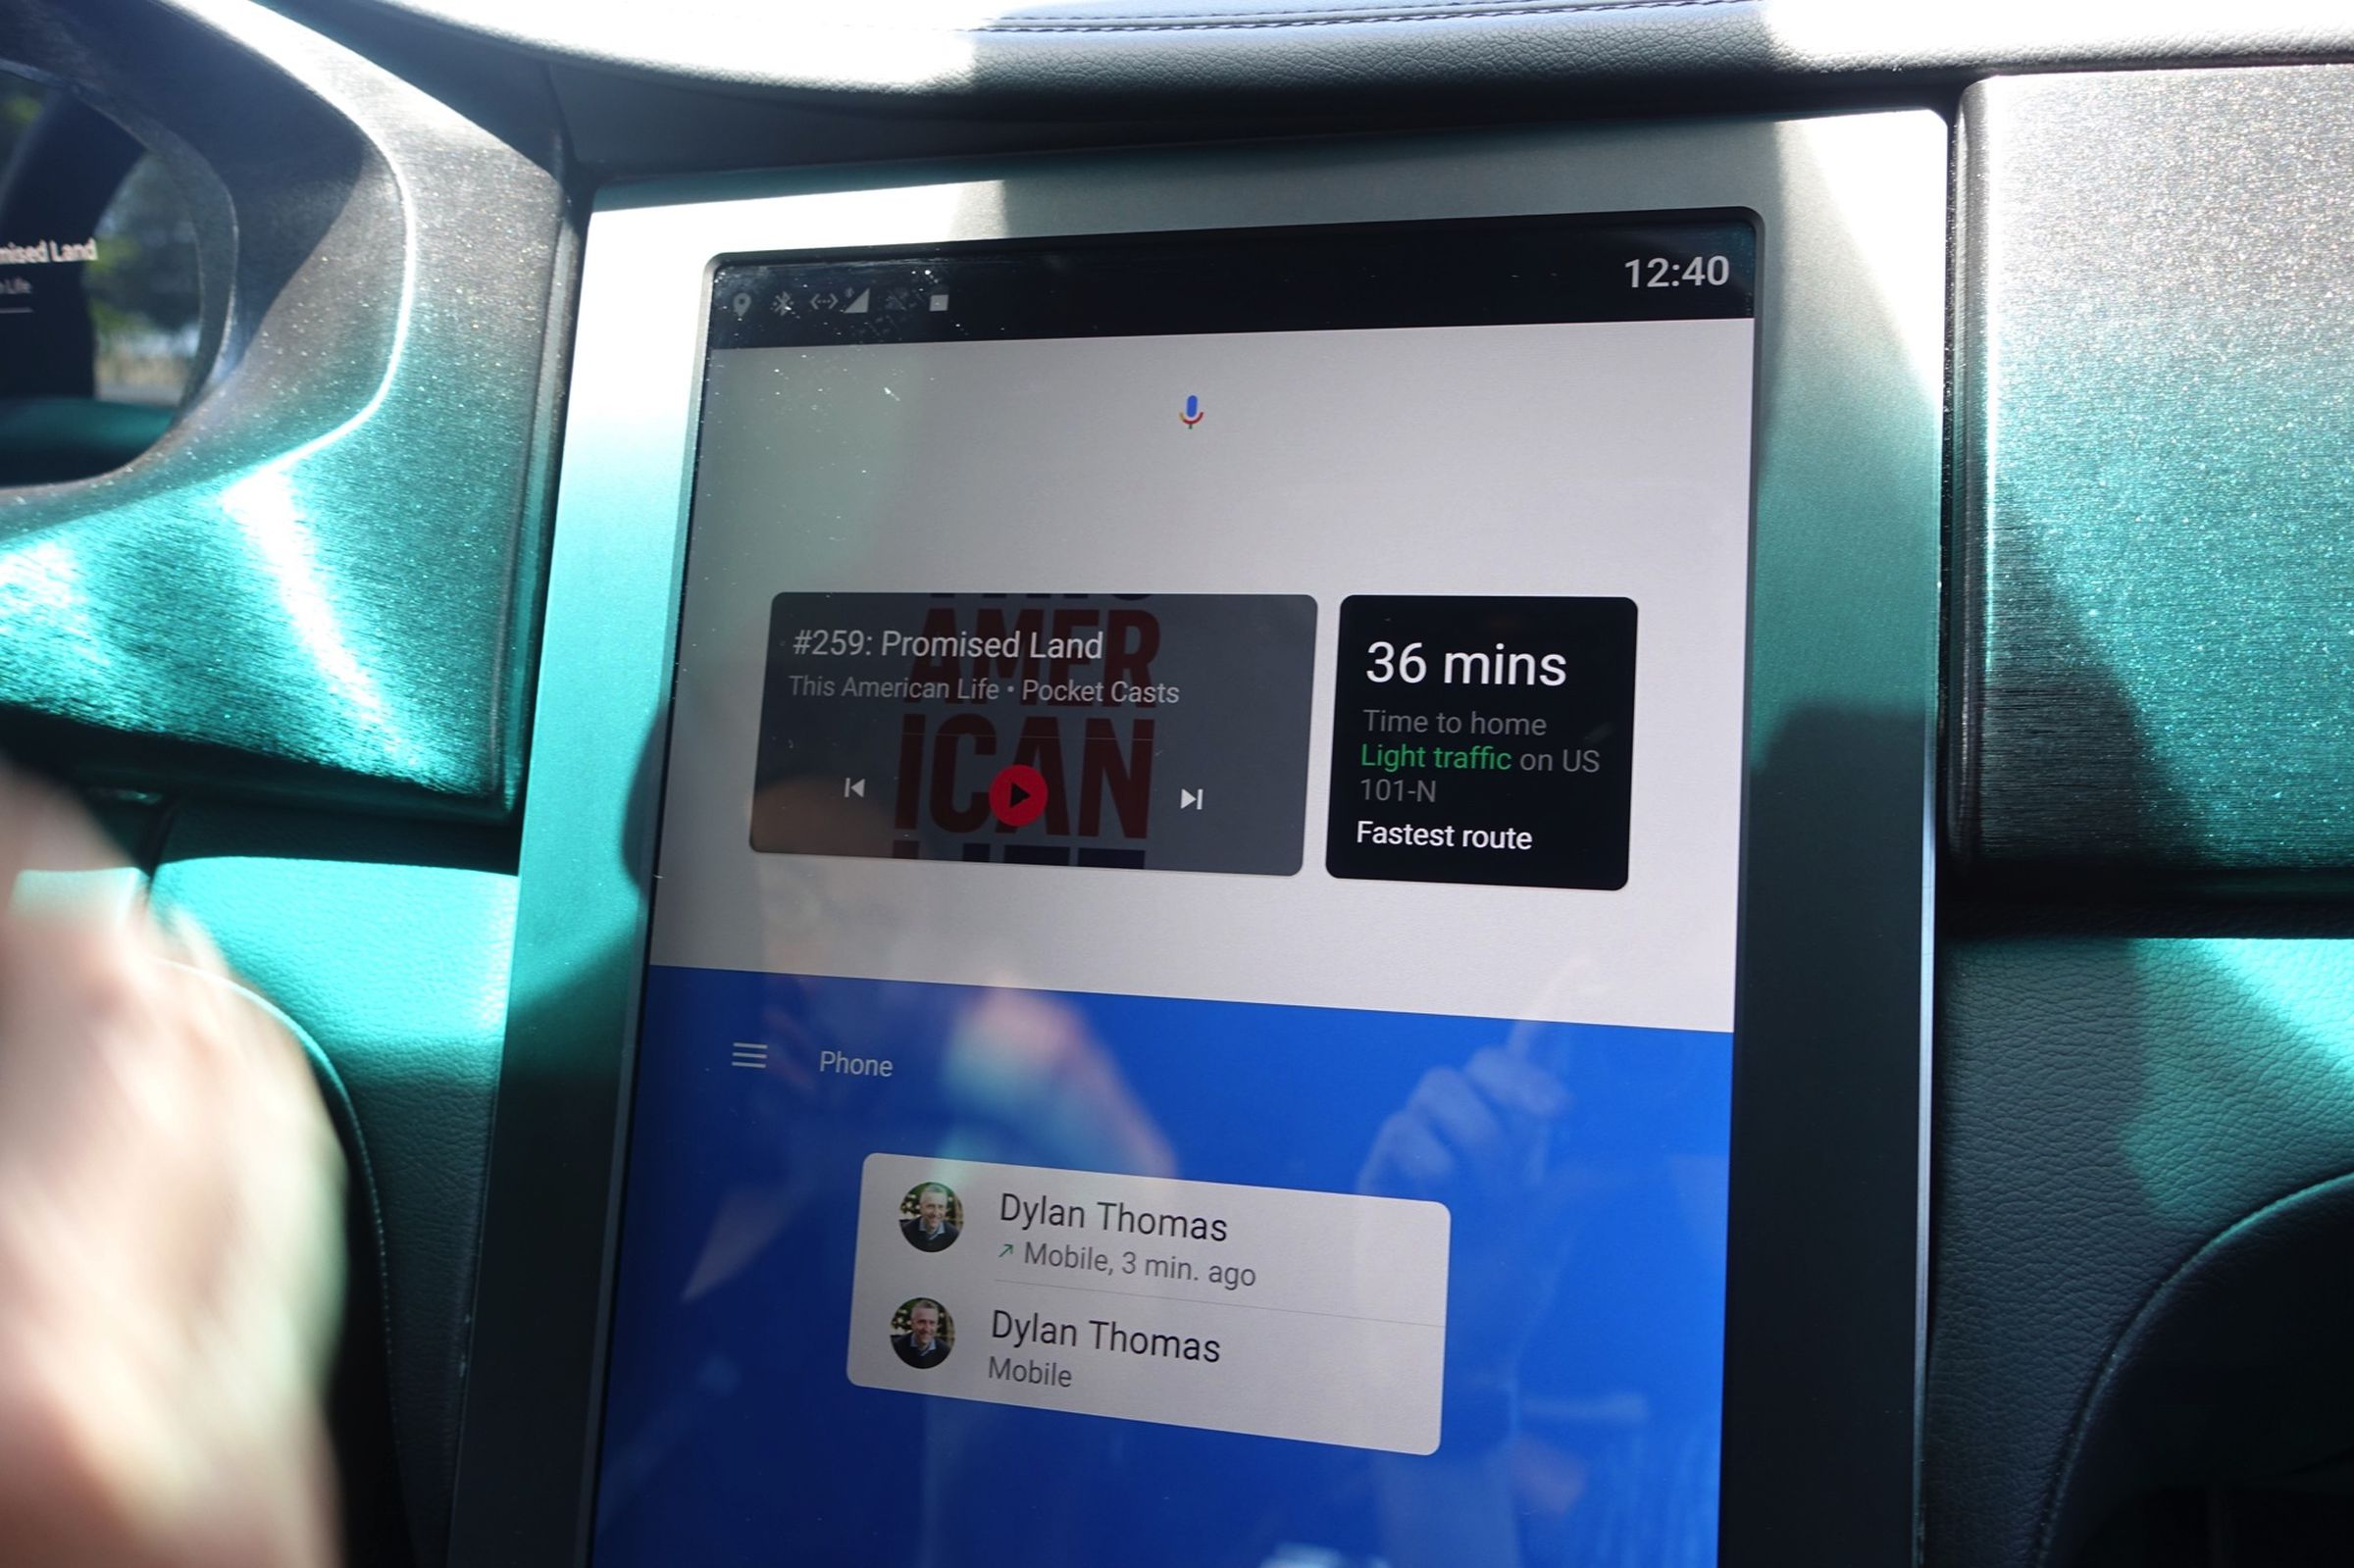 Android N in a Maserati Photos